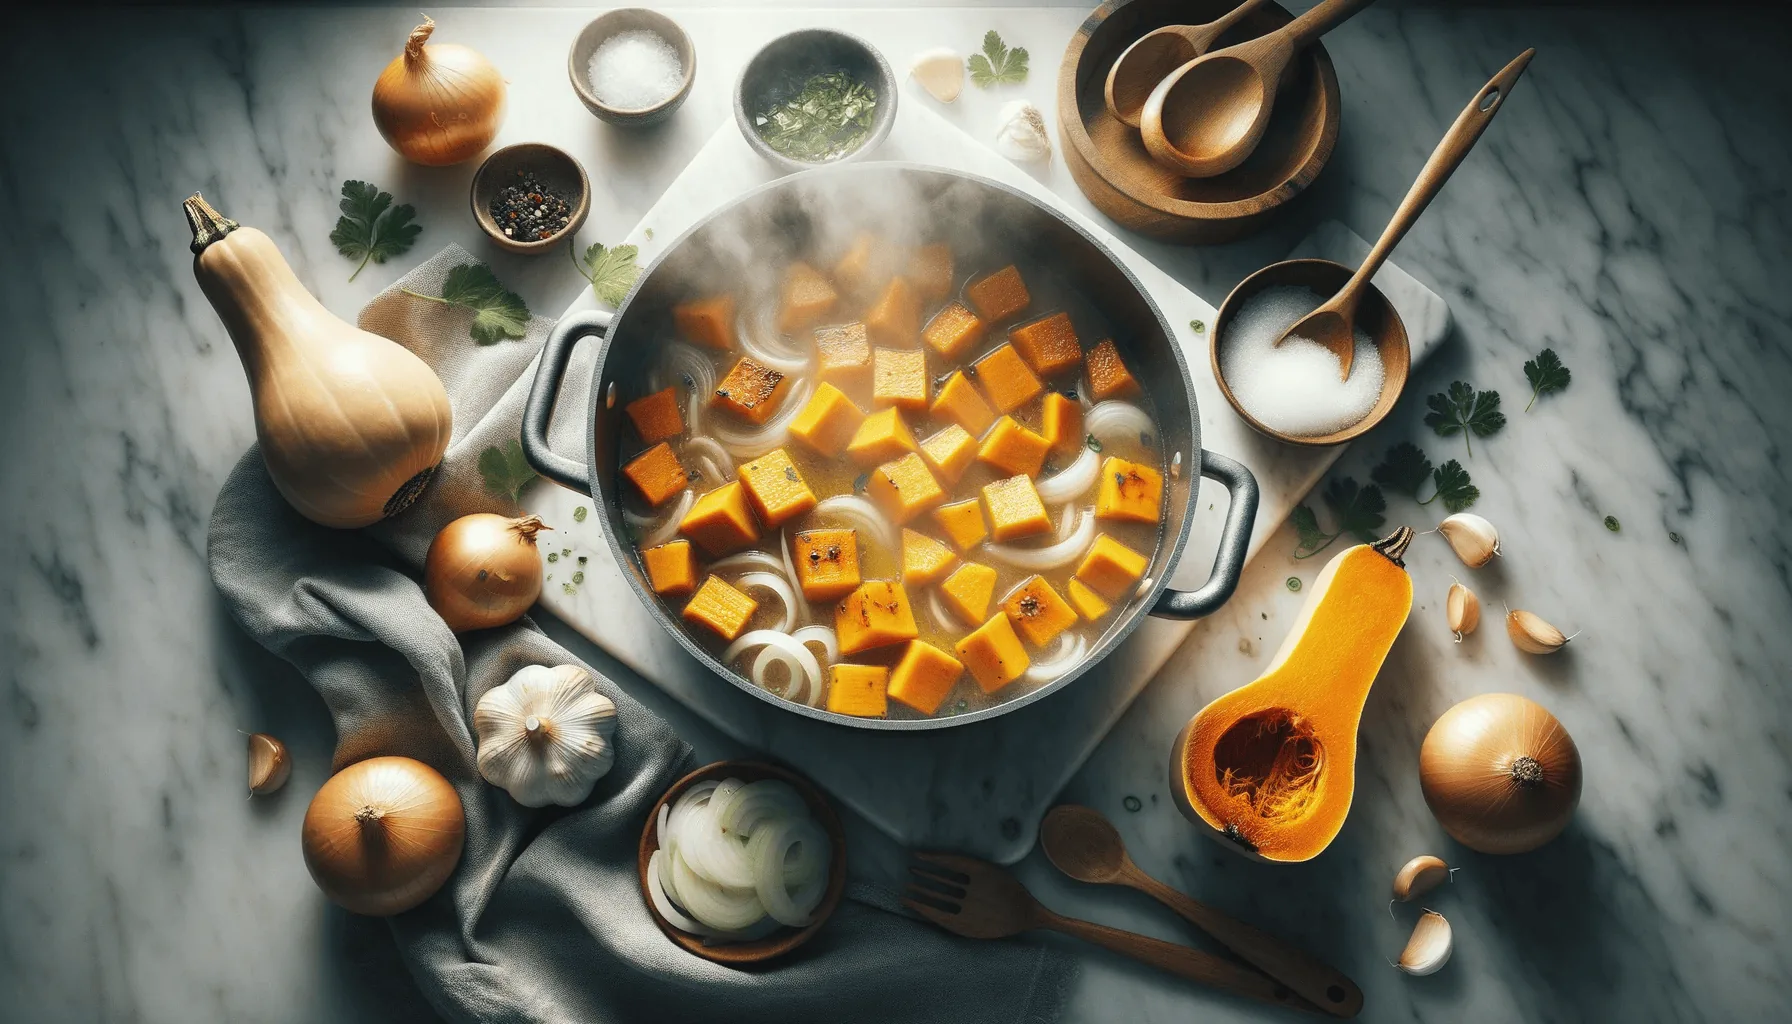 The making of my simple butternut squash soup